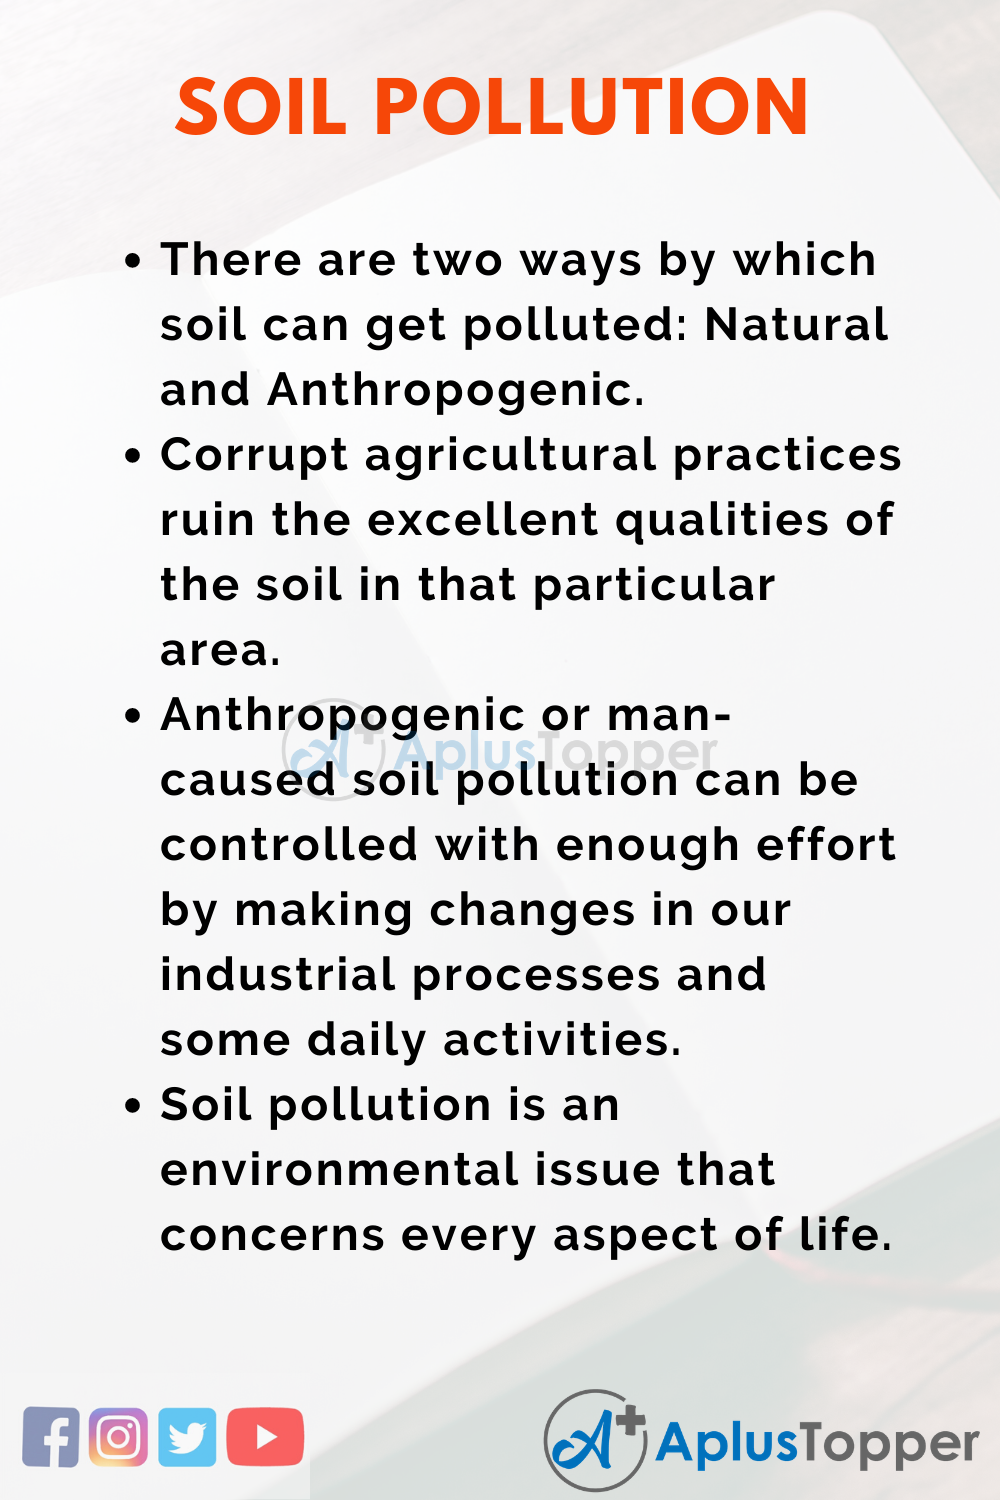 how to write an essay on soil pollution